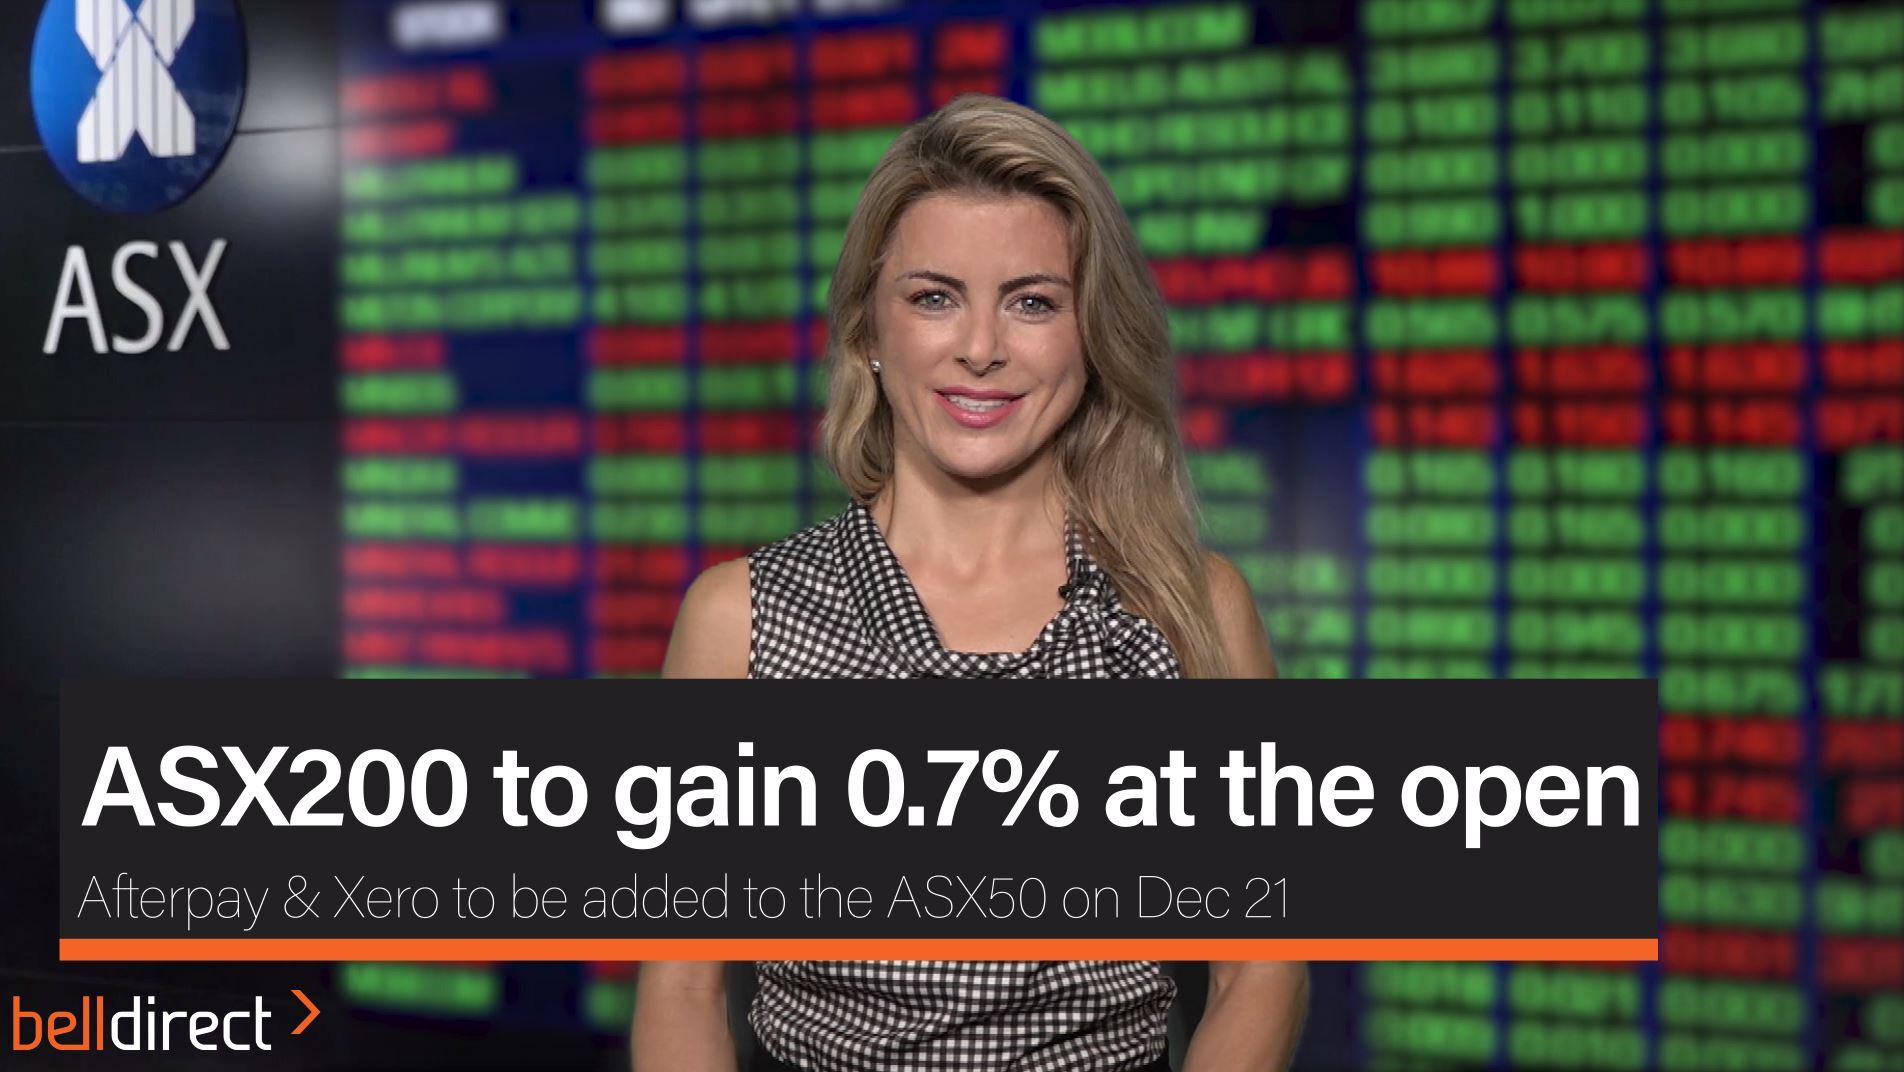 ASX200 to gain 0.7% at the open